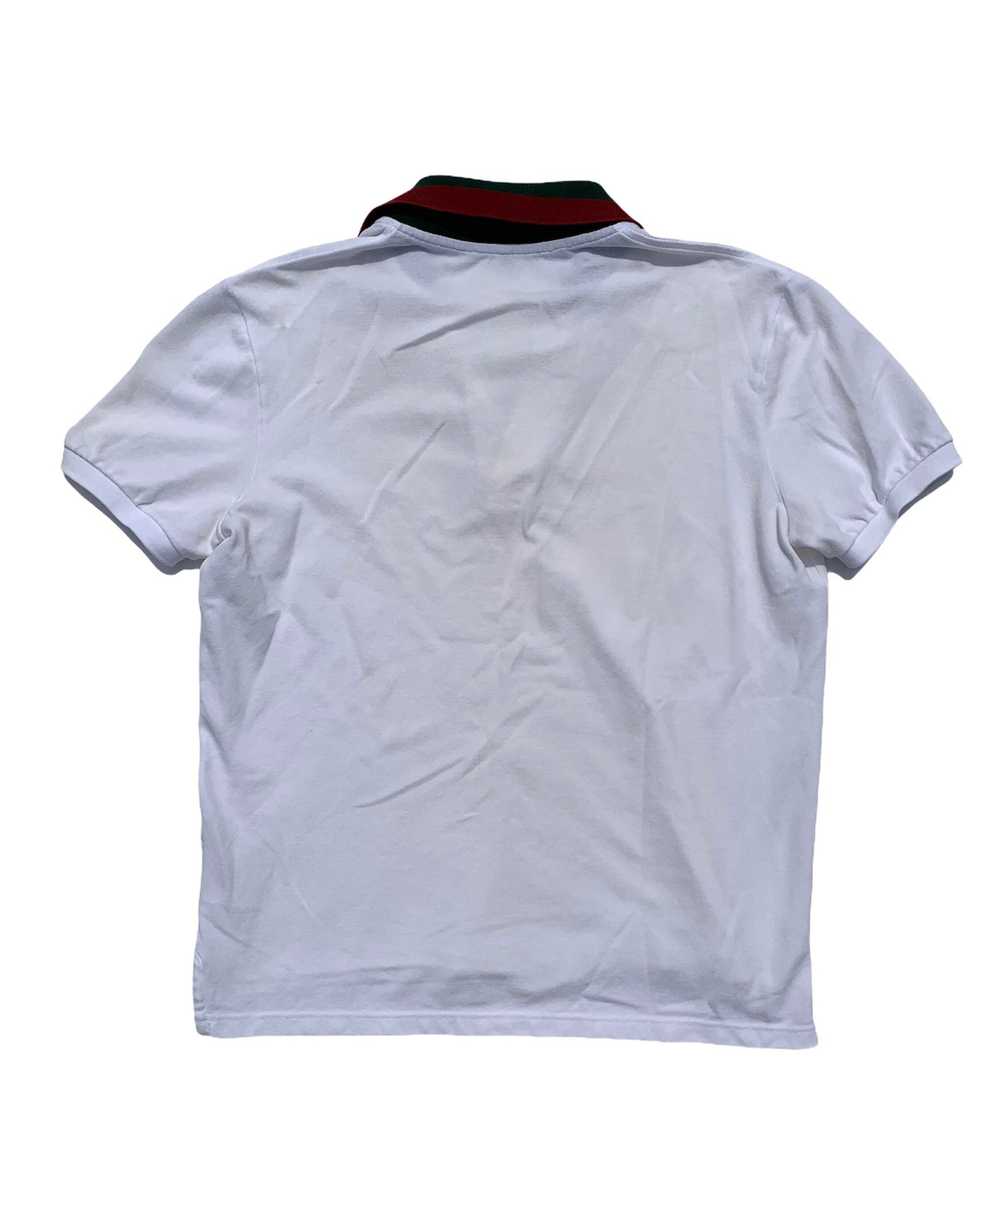 Gucci White Polo Shirt With Web Green/Red Collar - image 3